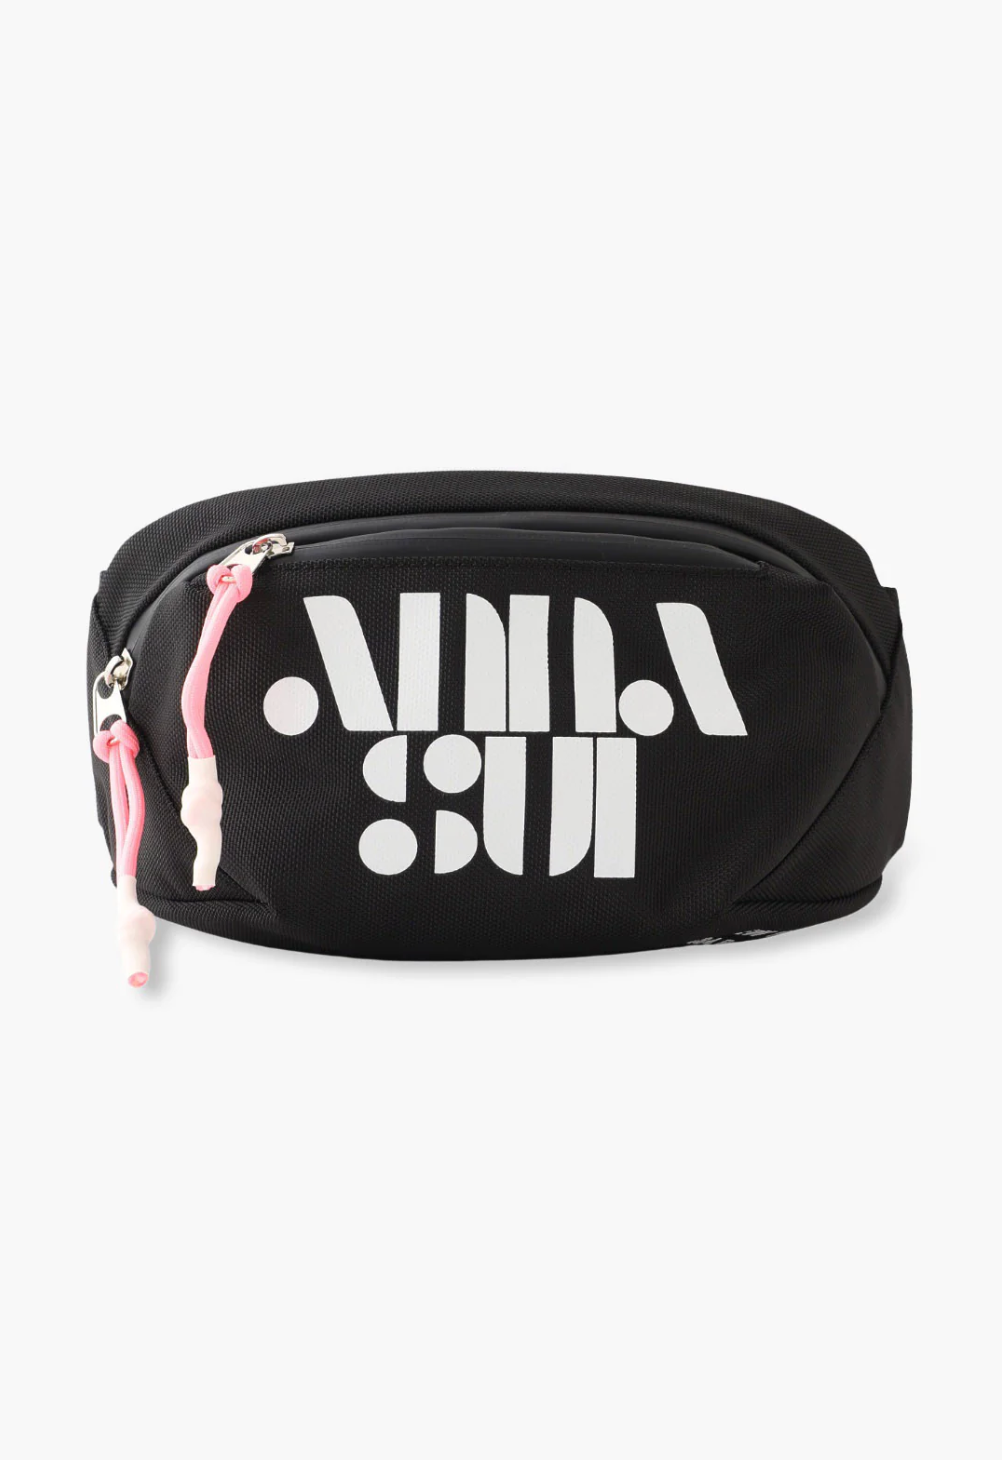 Black bag, front Anna Sui logo in white retro style lettering, light pink pulls on zippers